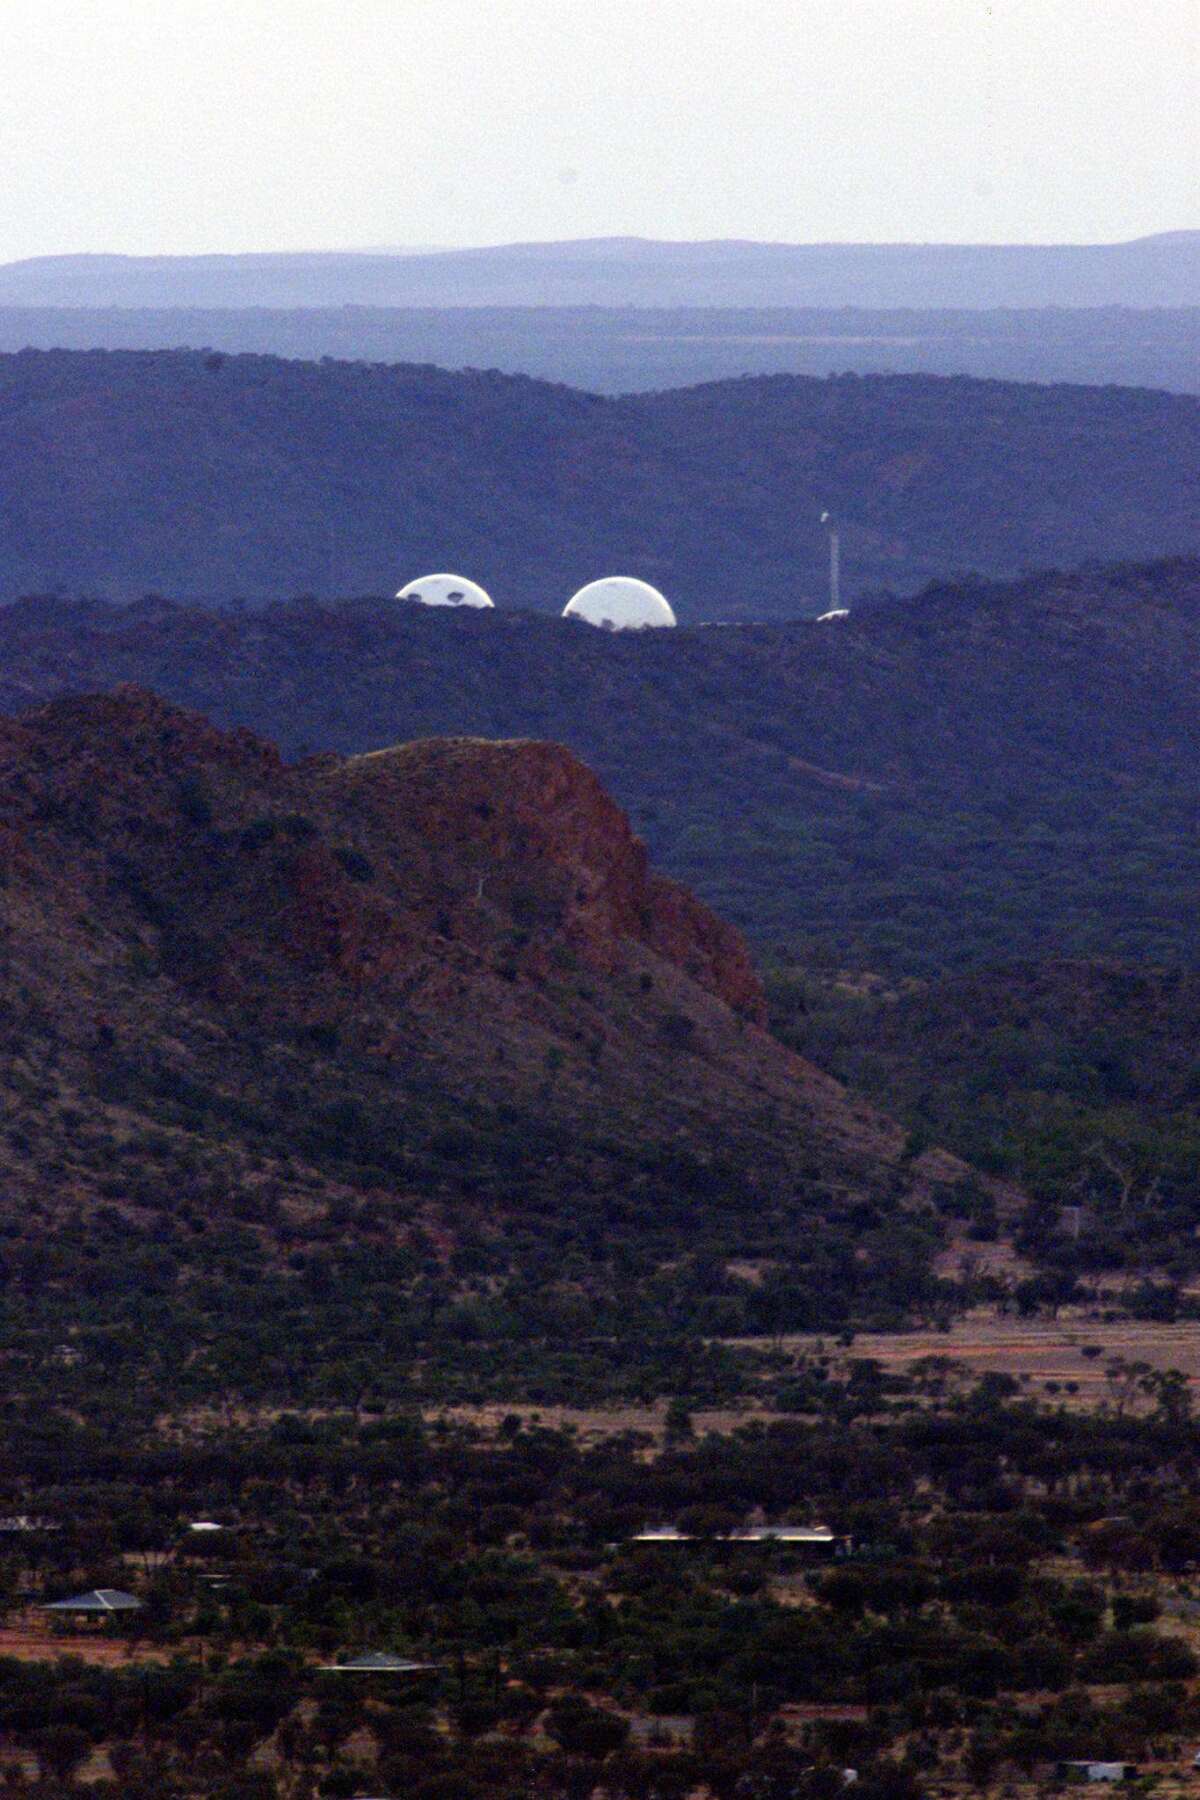 The radar domes of the joint U.S.-Australian missile defense base at Pine Gap near Alice Springs in central Australia, in a 1999 image.